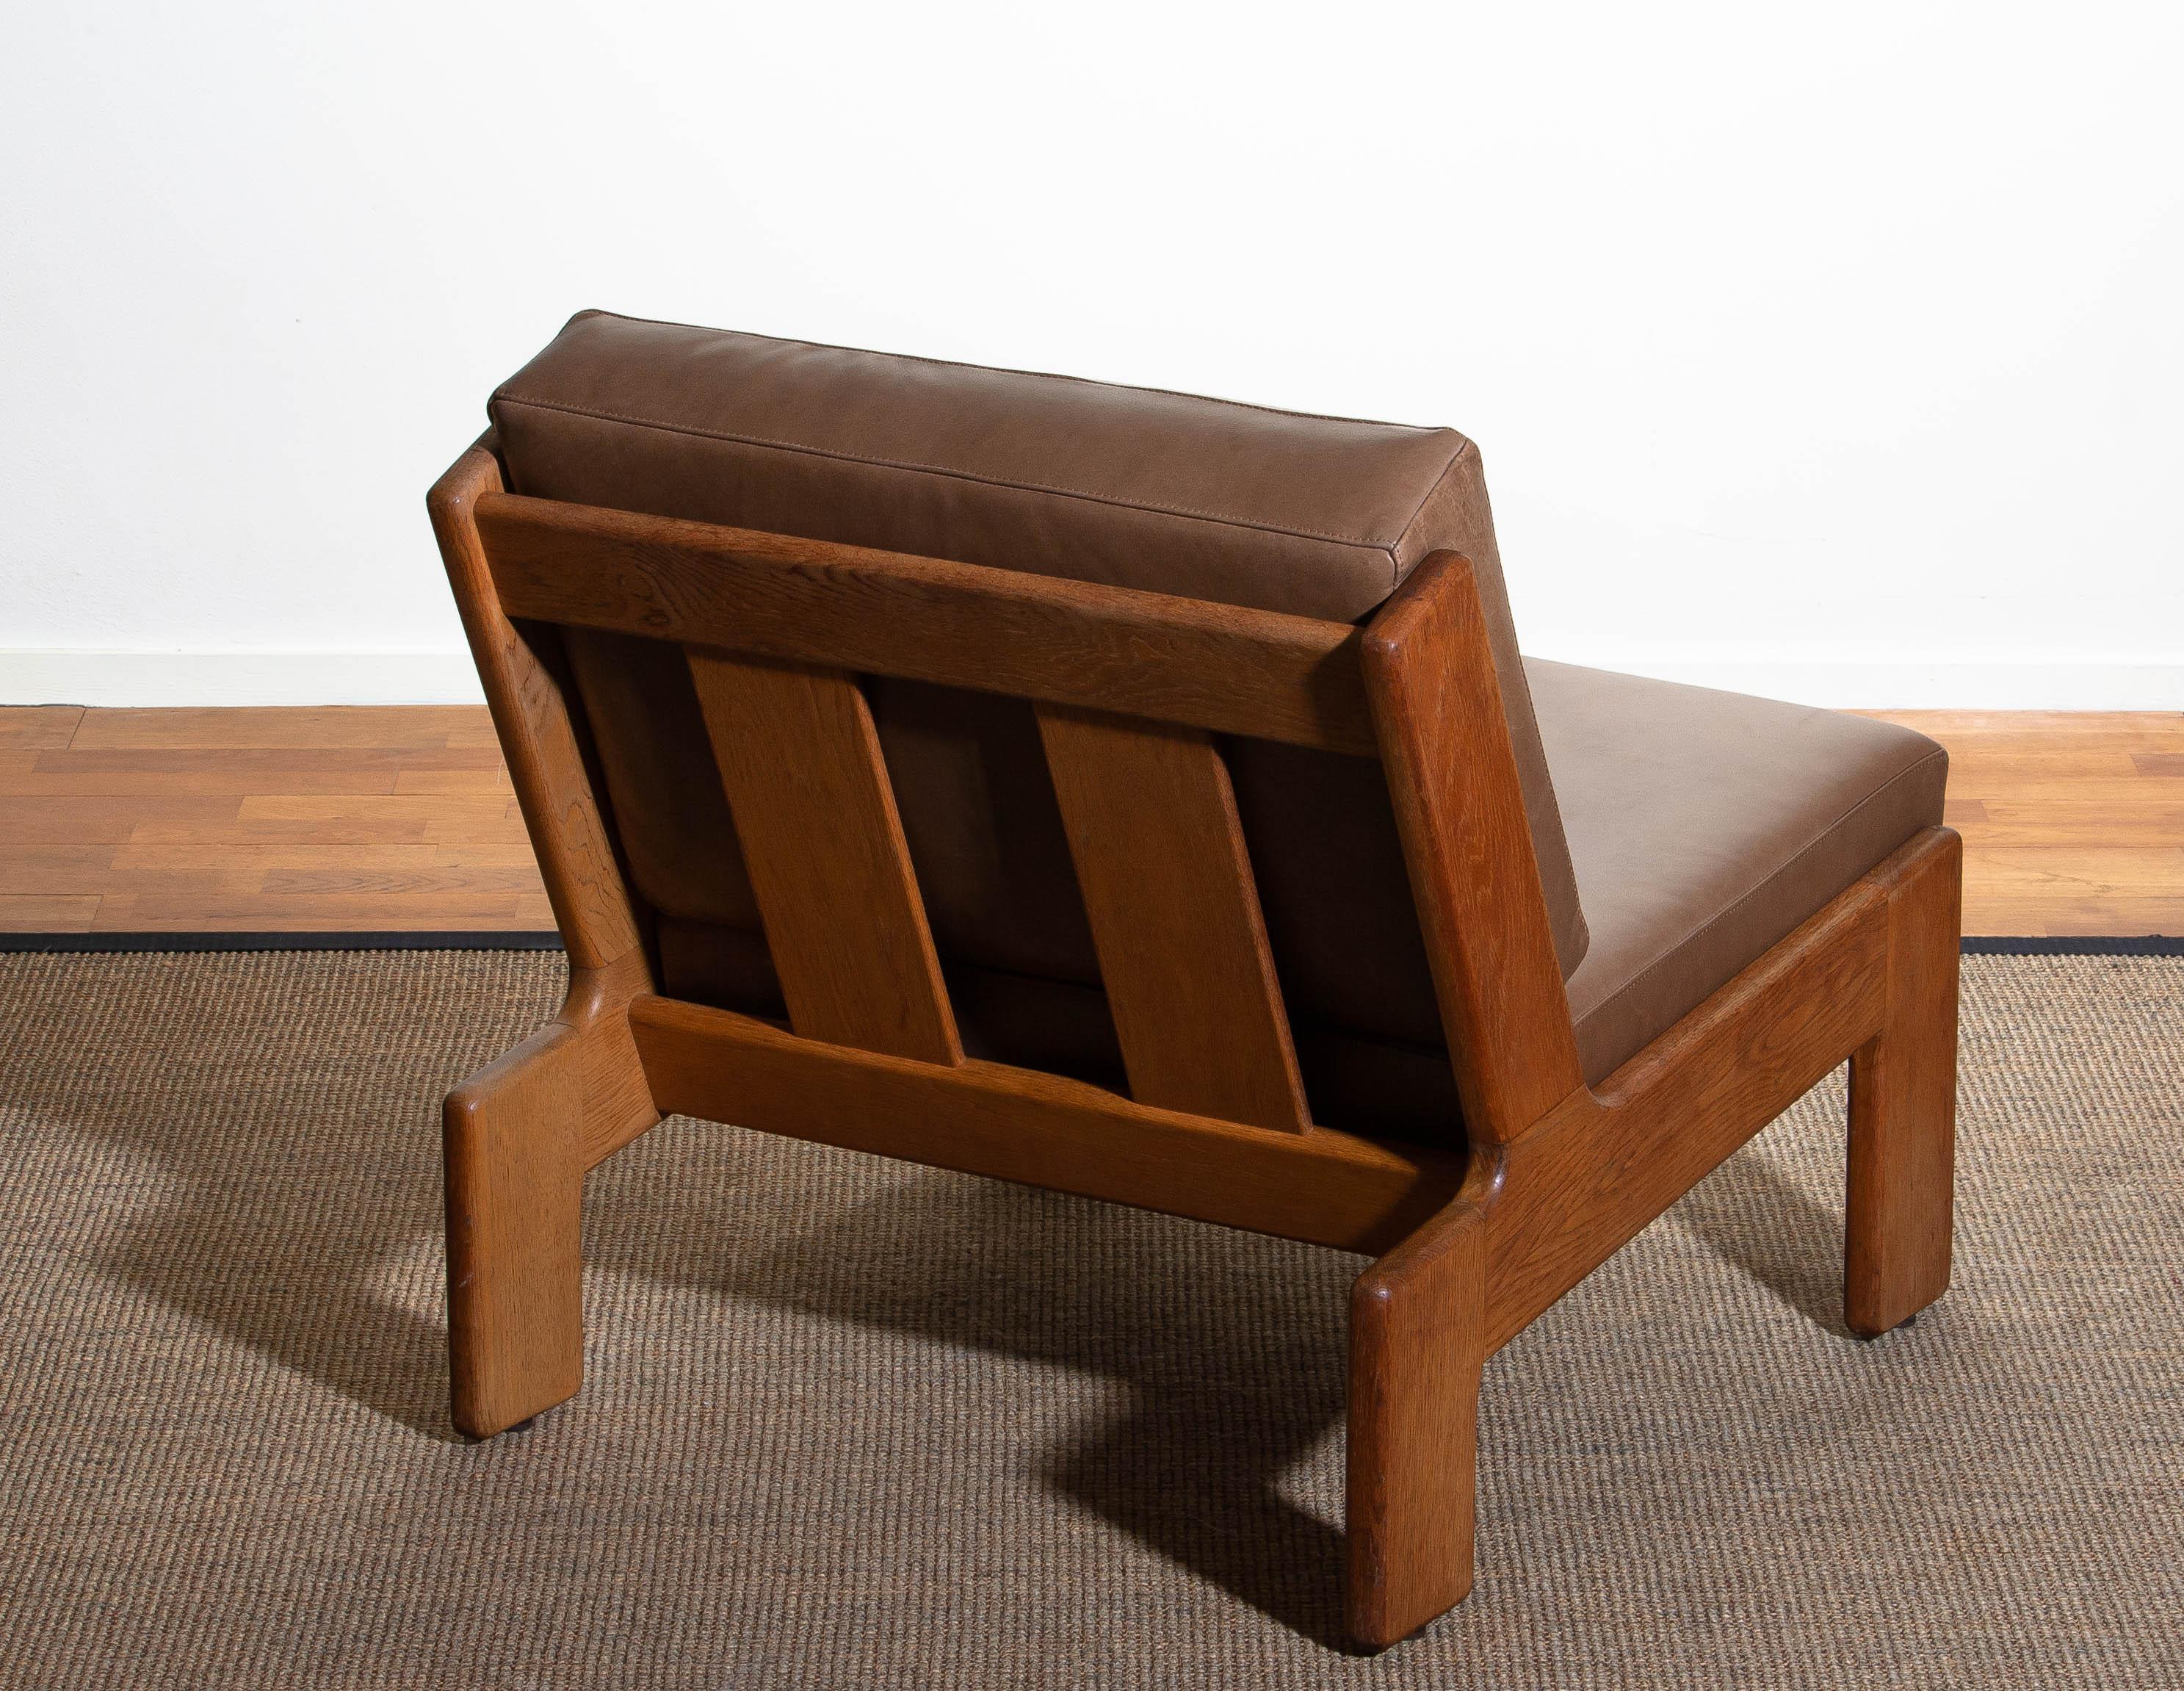 1960s, Oak and Leather Cubist Lounge Chair by Esko Pajamies for Asko, Finland 2